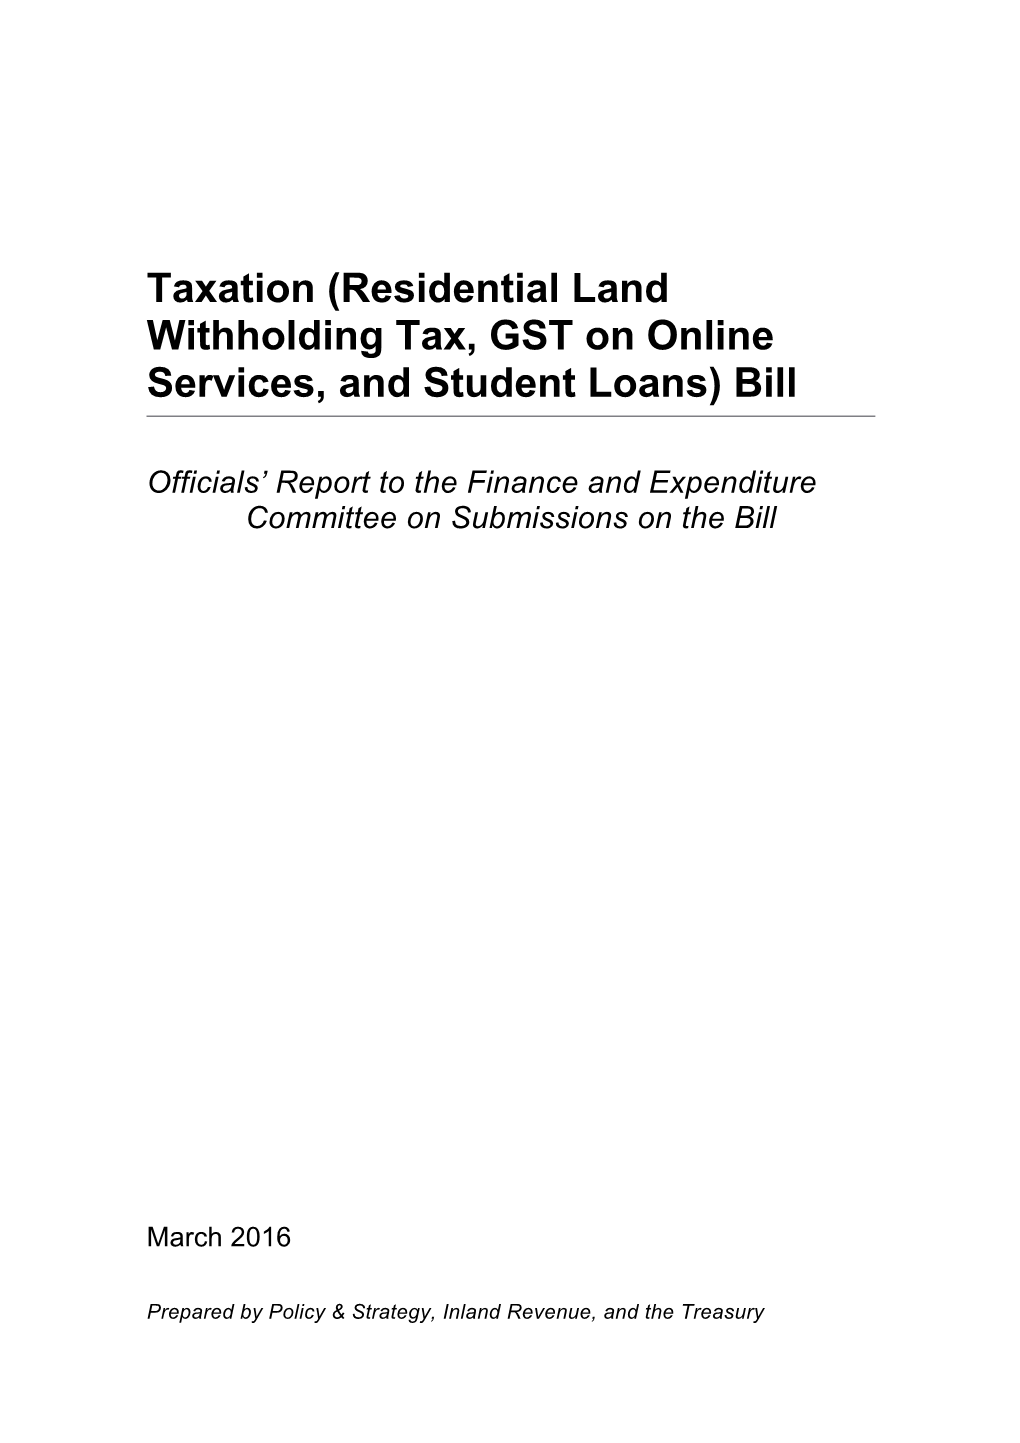 Taxation (Residential Land Withholding Tax, GST on Online Services, and Student Loans)